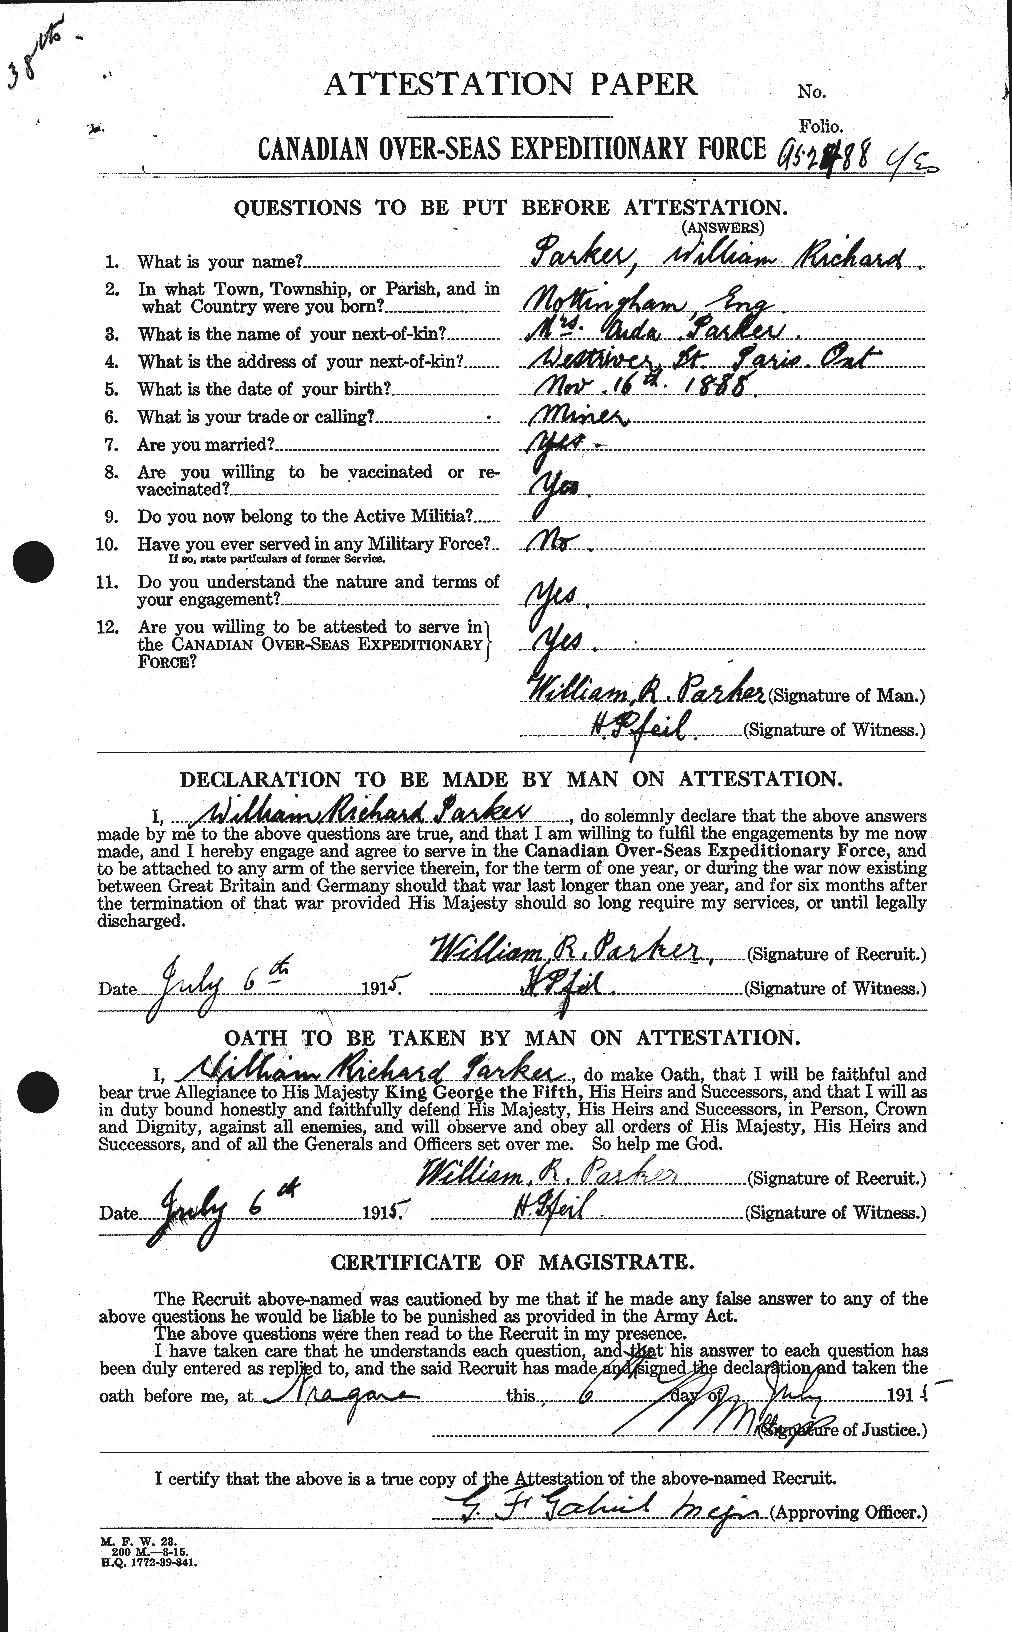 Personnel Records of the First World War - CEF 565782a